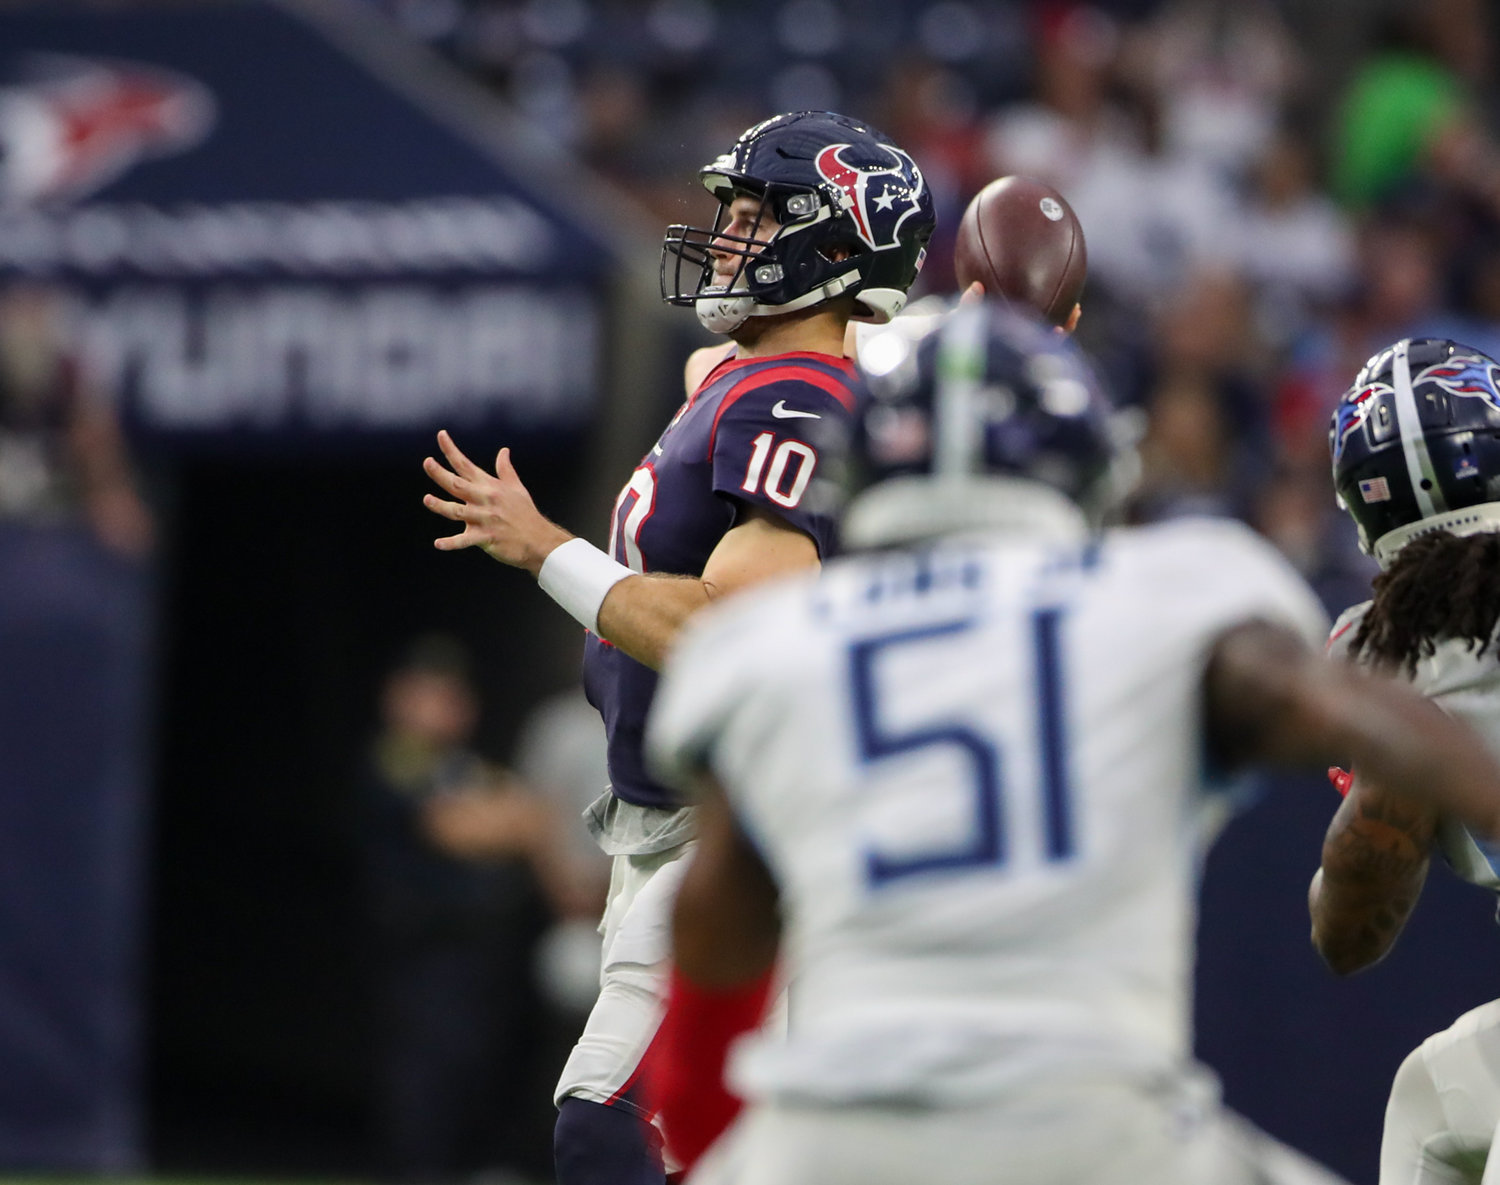 Houston Texans quarterback Davis Mills (10) throws a touchdown pass to Danny Amendola in the fourth quarter of an NFL game between the Texans and the Titans on Jan. 9, 2022 in Houston, Texas.